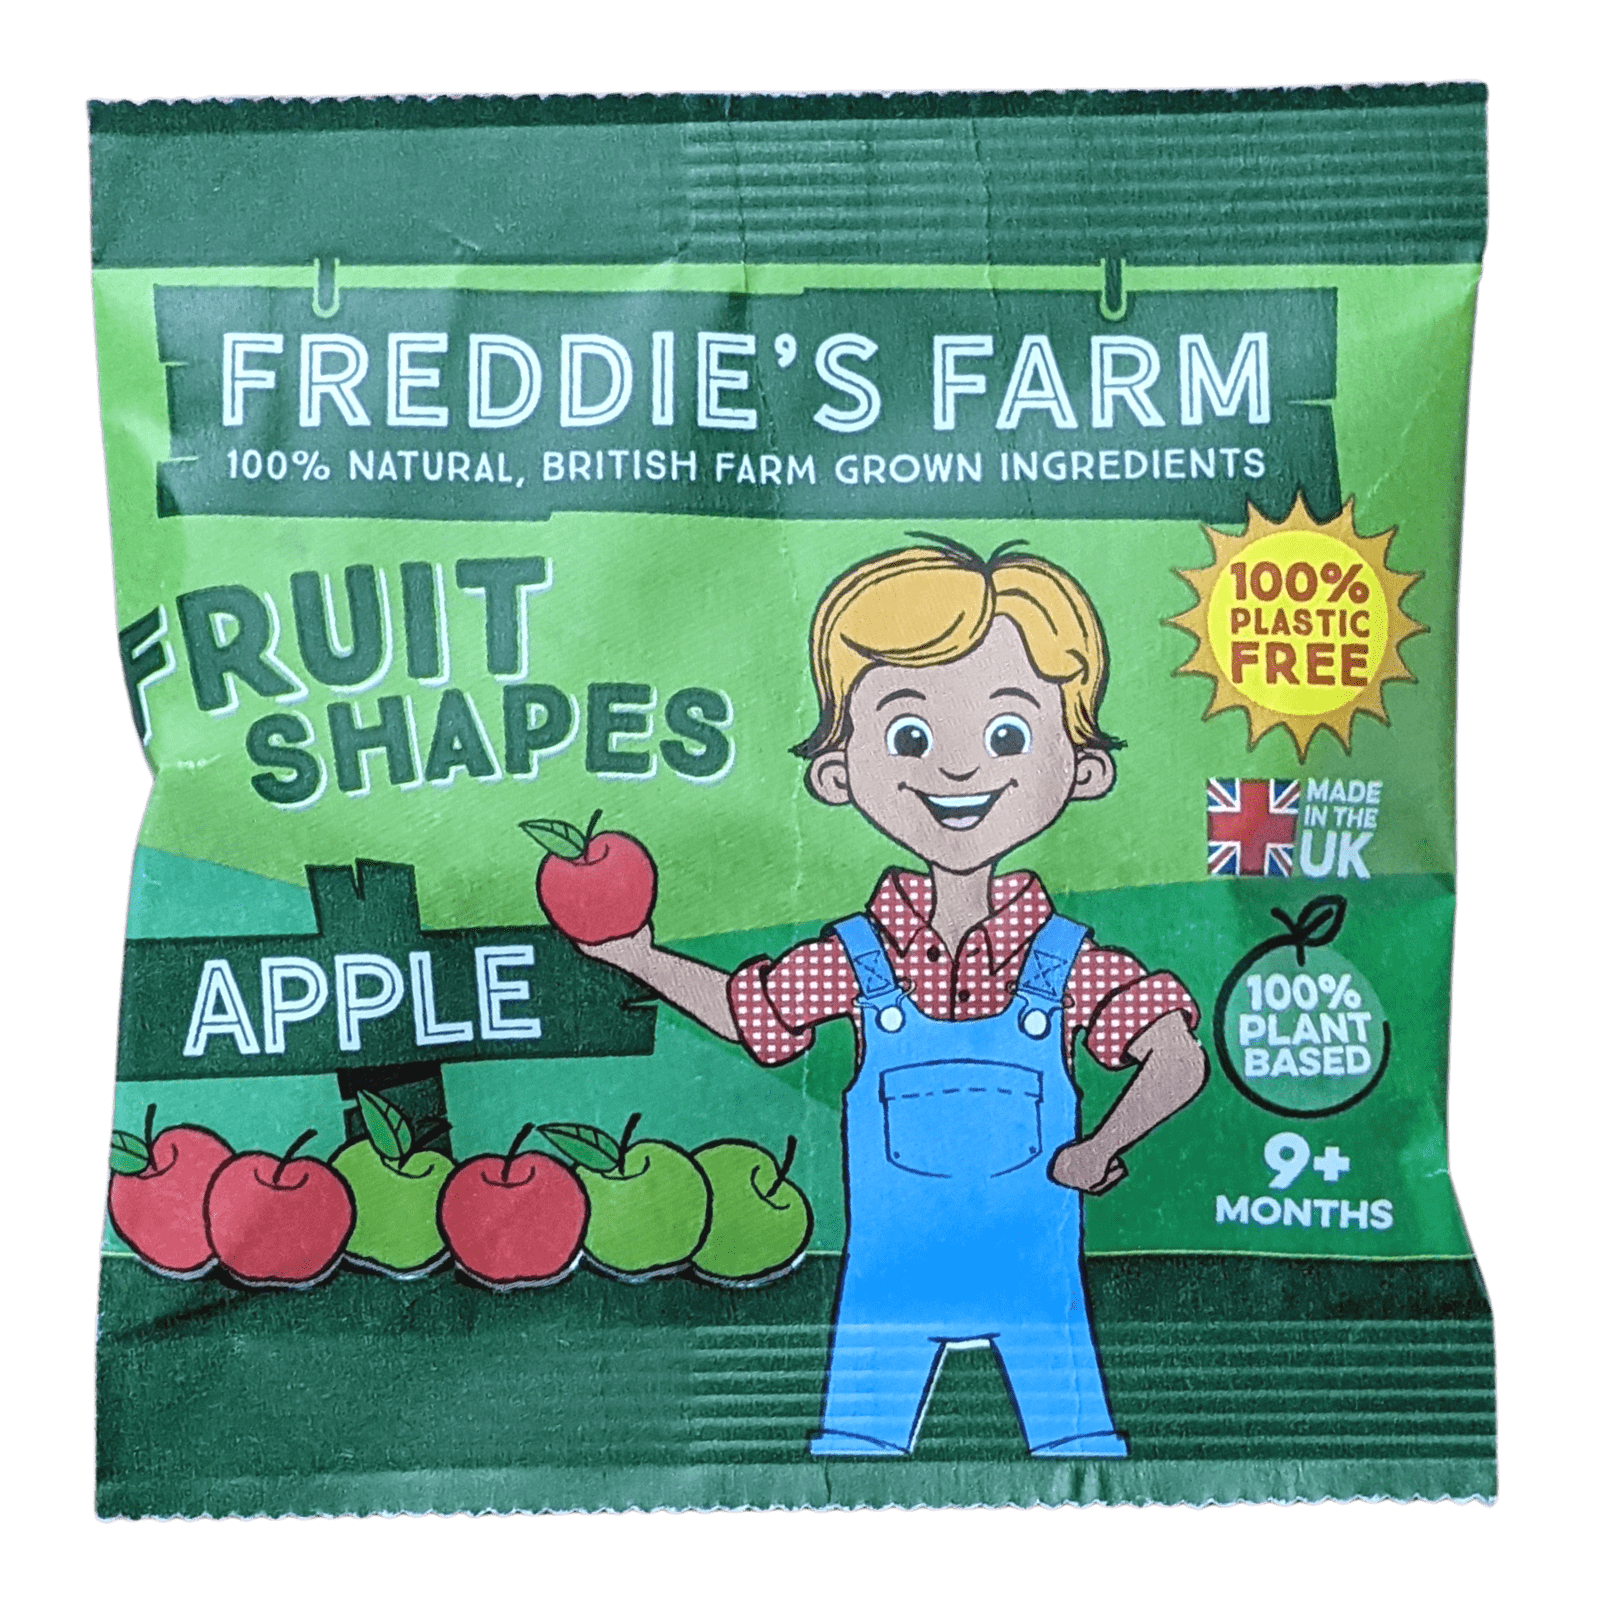 Freddie's Farm Fruit Shapes - Apple - Multipack SRP (5 x 5 x 20g plastic free packets) - NEW